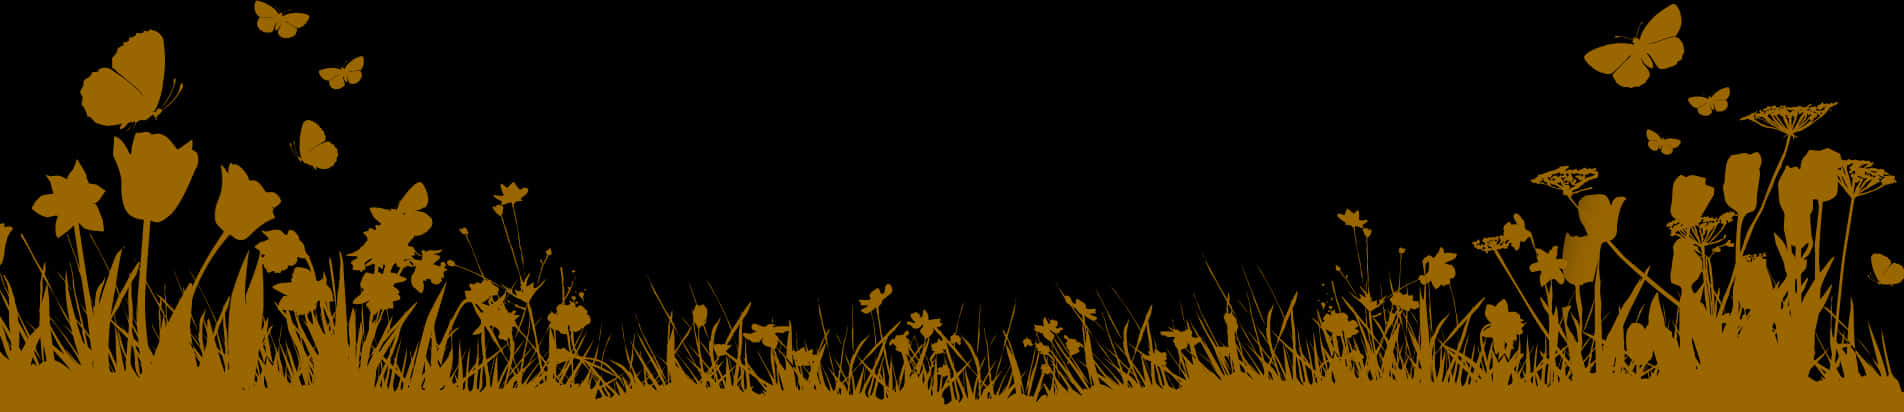 Golden Nature Silhouette Border PNG